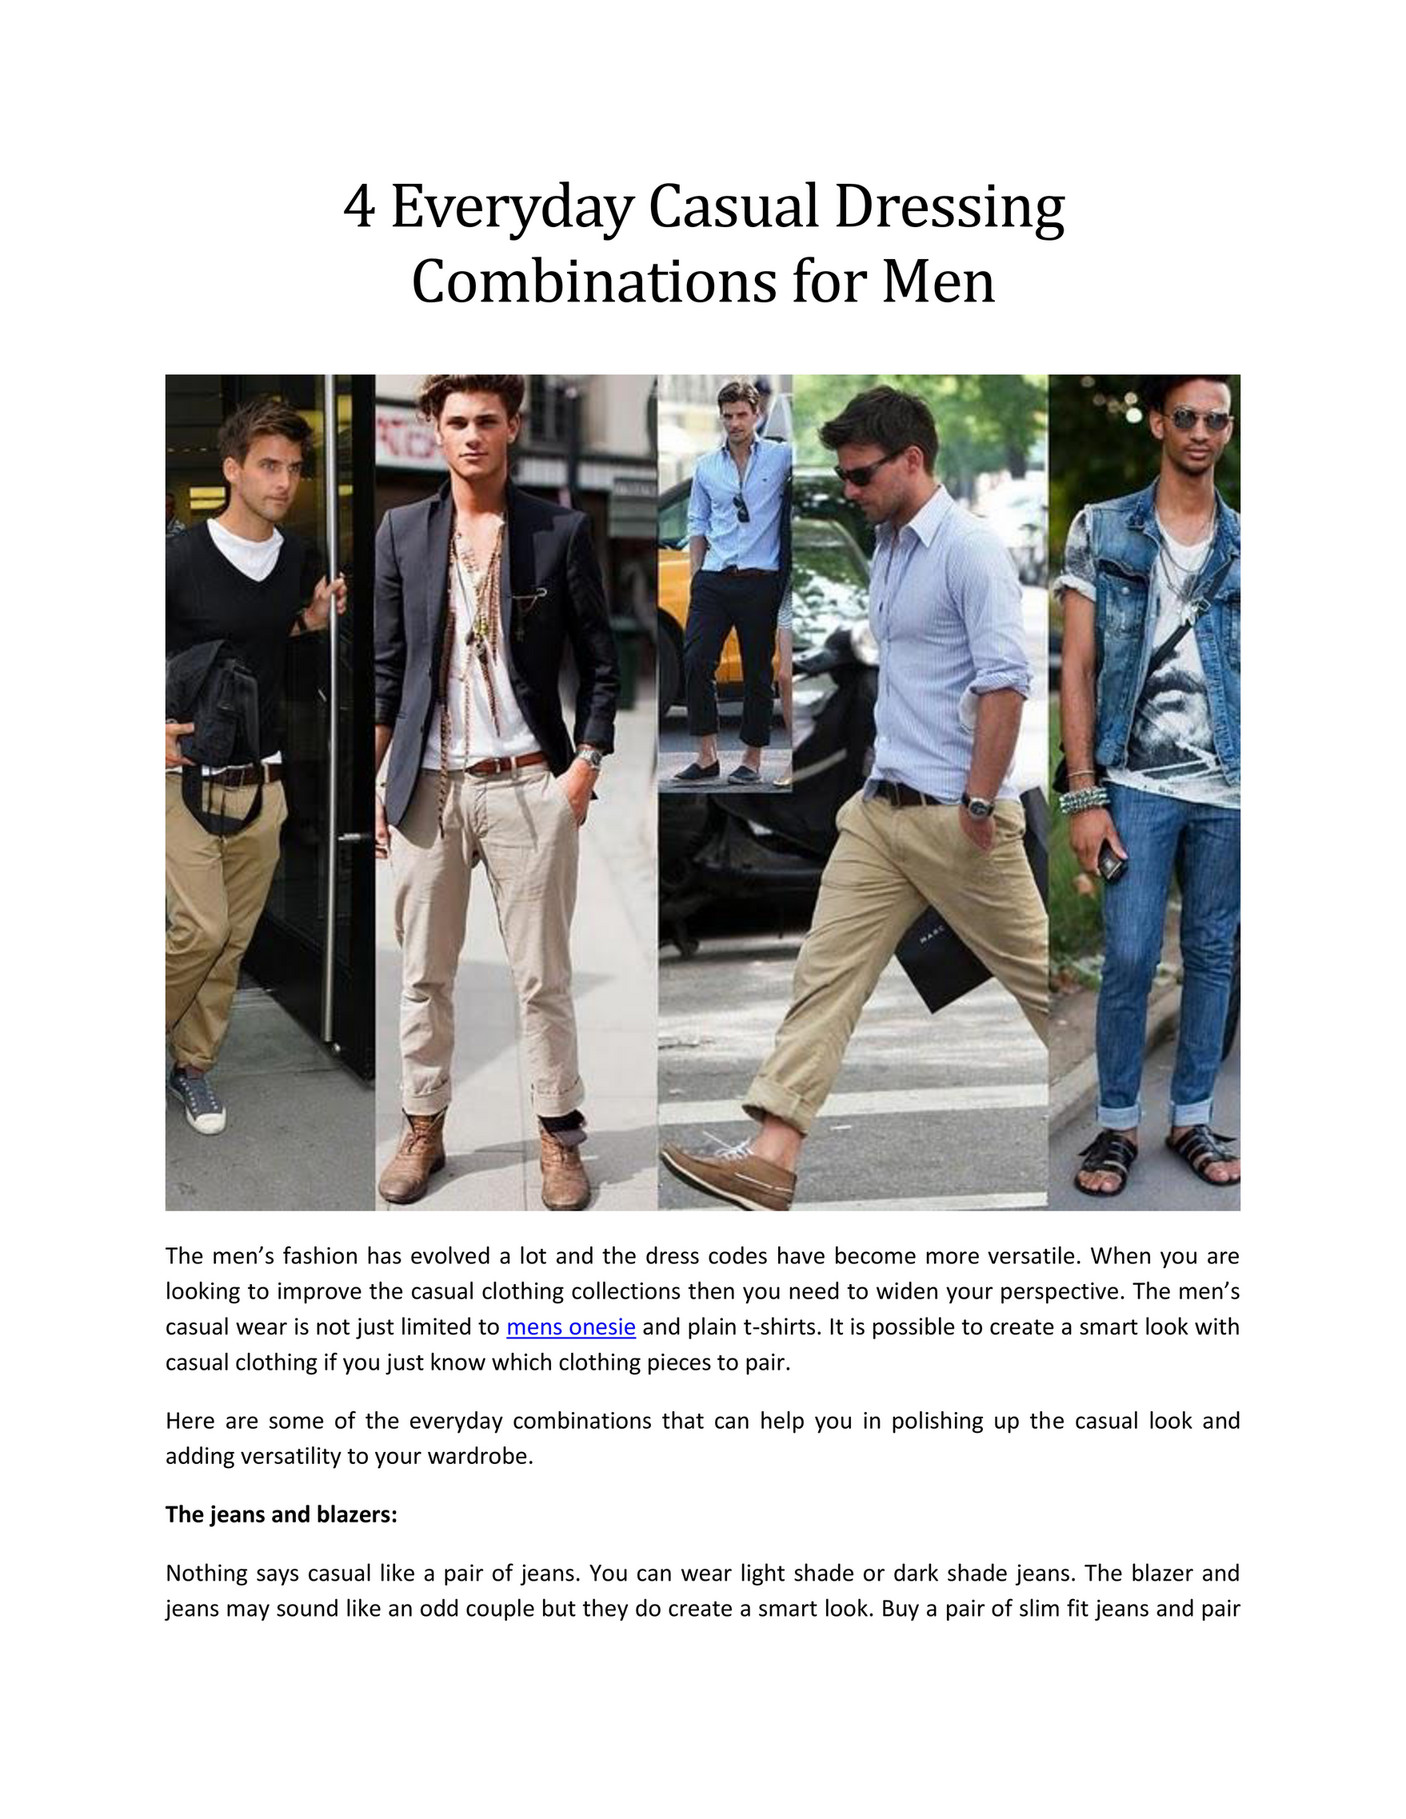 SMM - 4 everyday casual dressing combinations for men - Page 1 ...